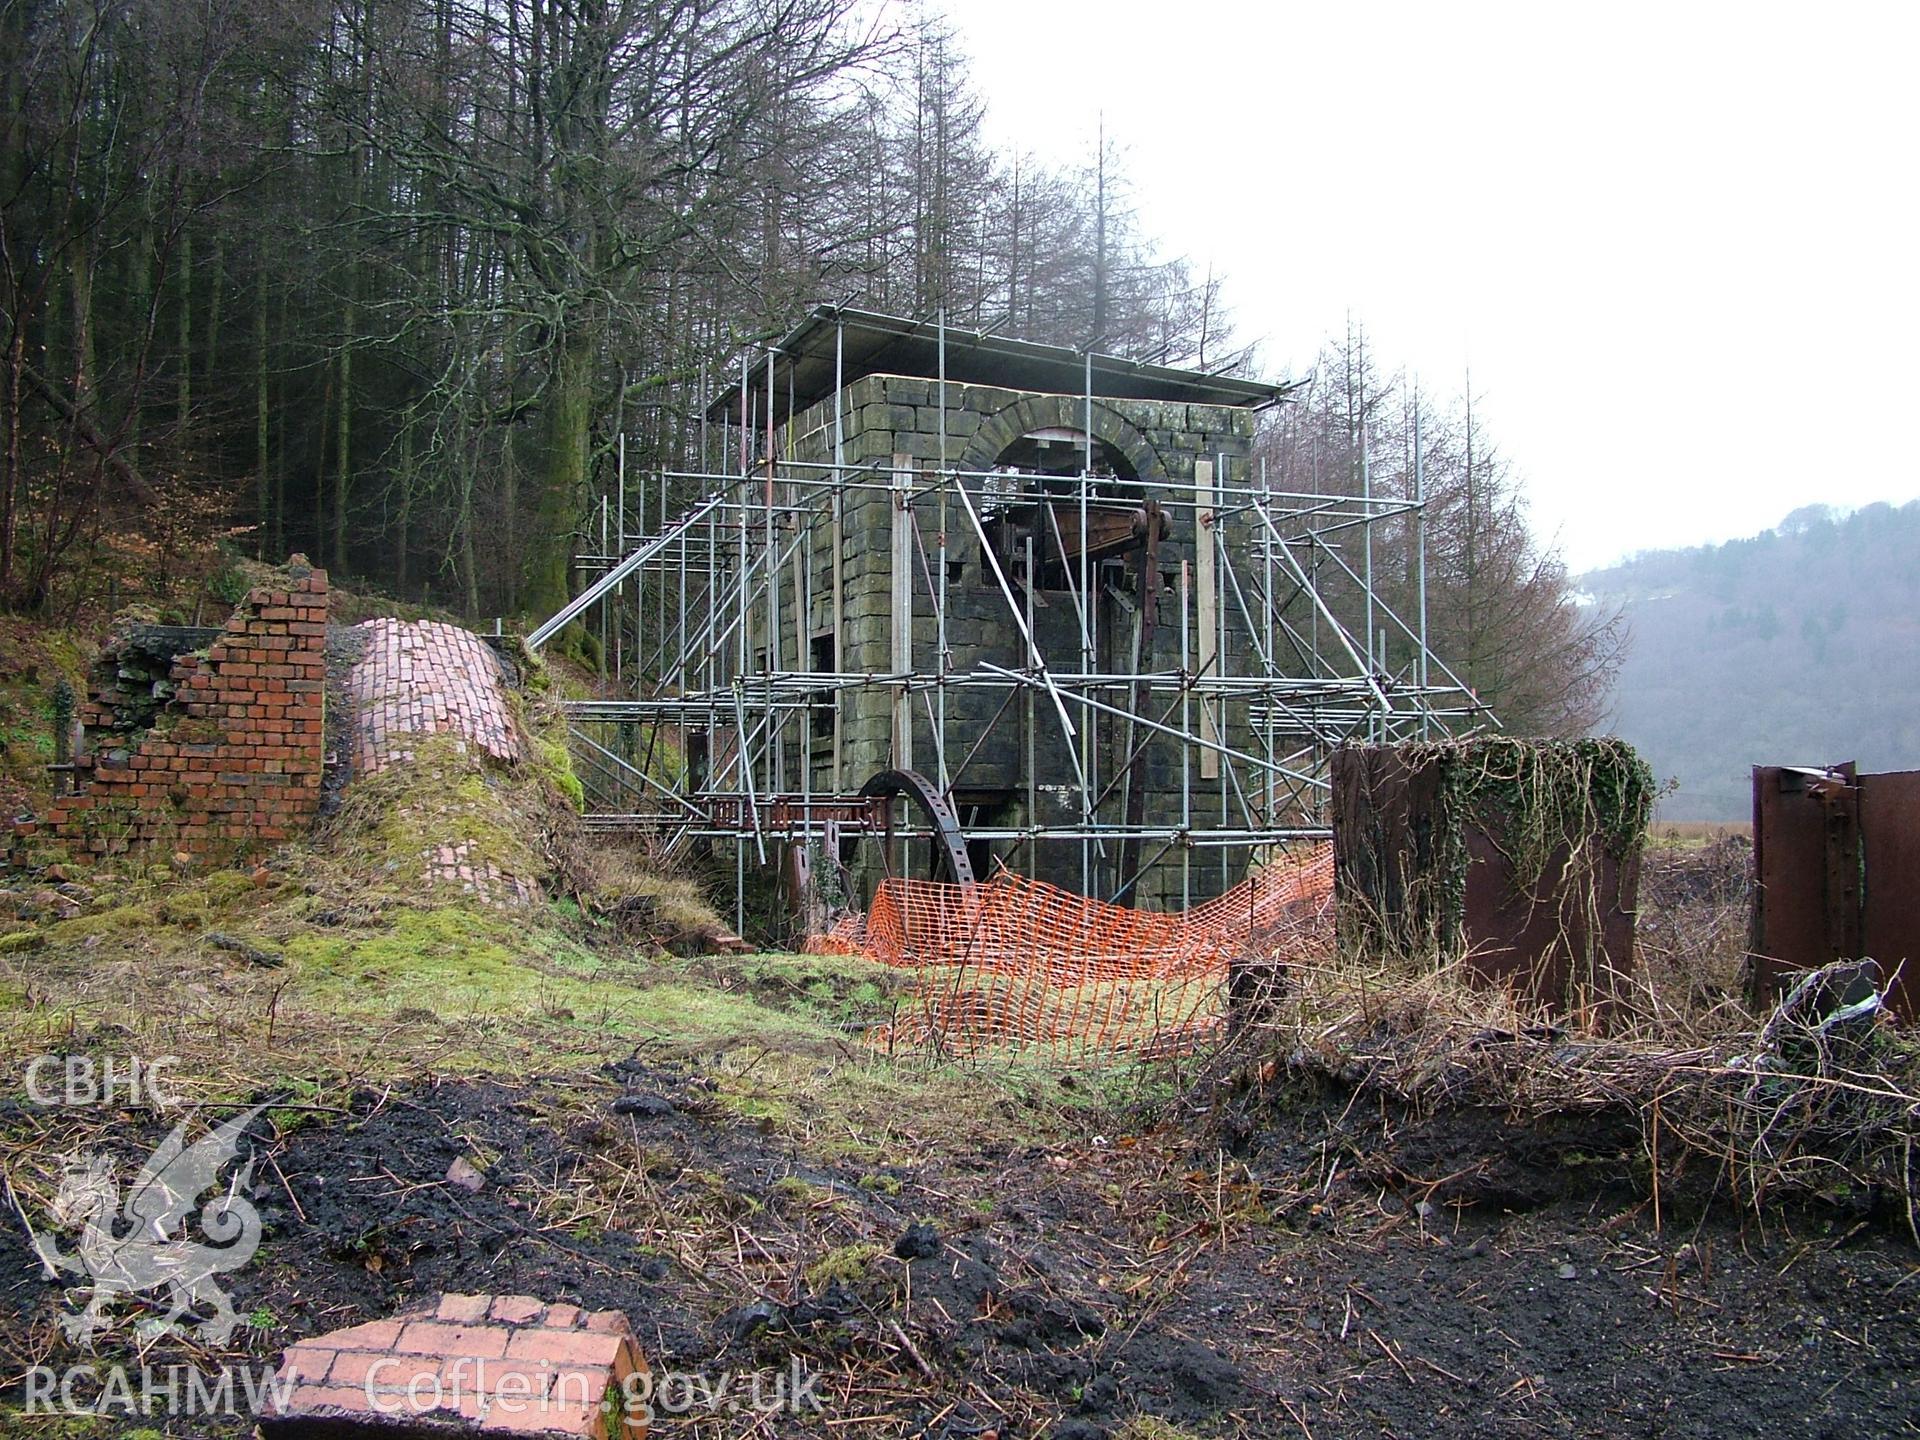 View of 1845 engine house with scaffolding.